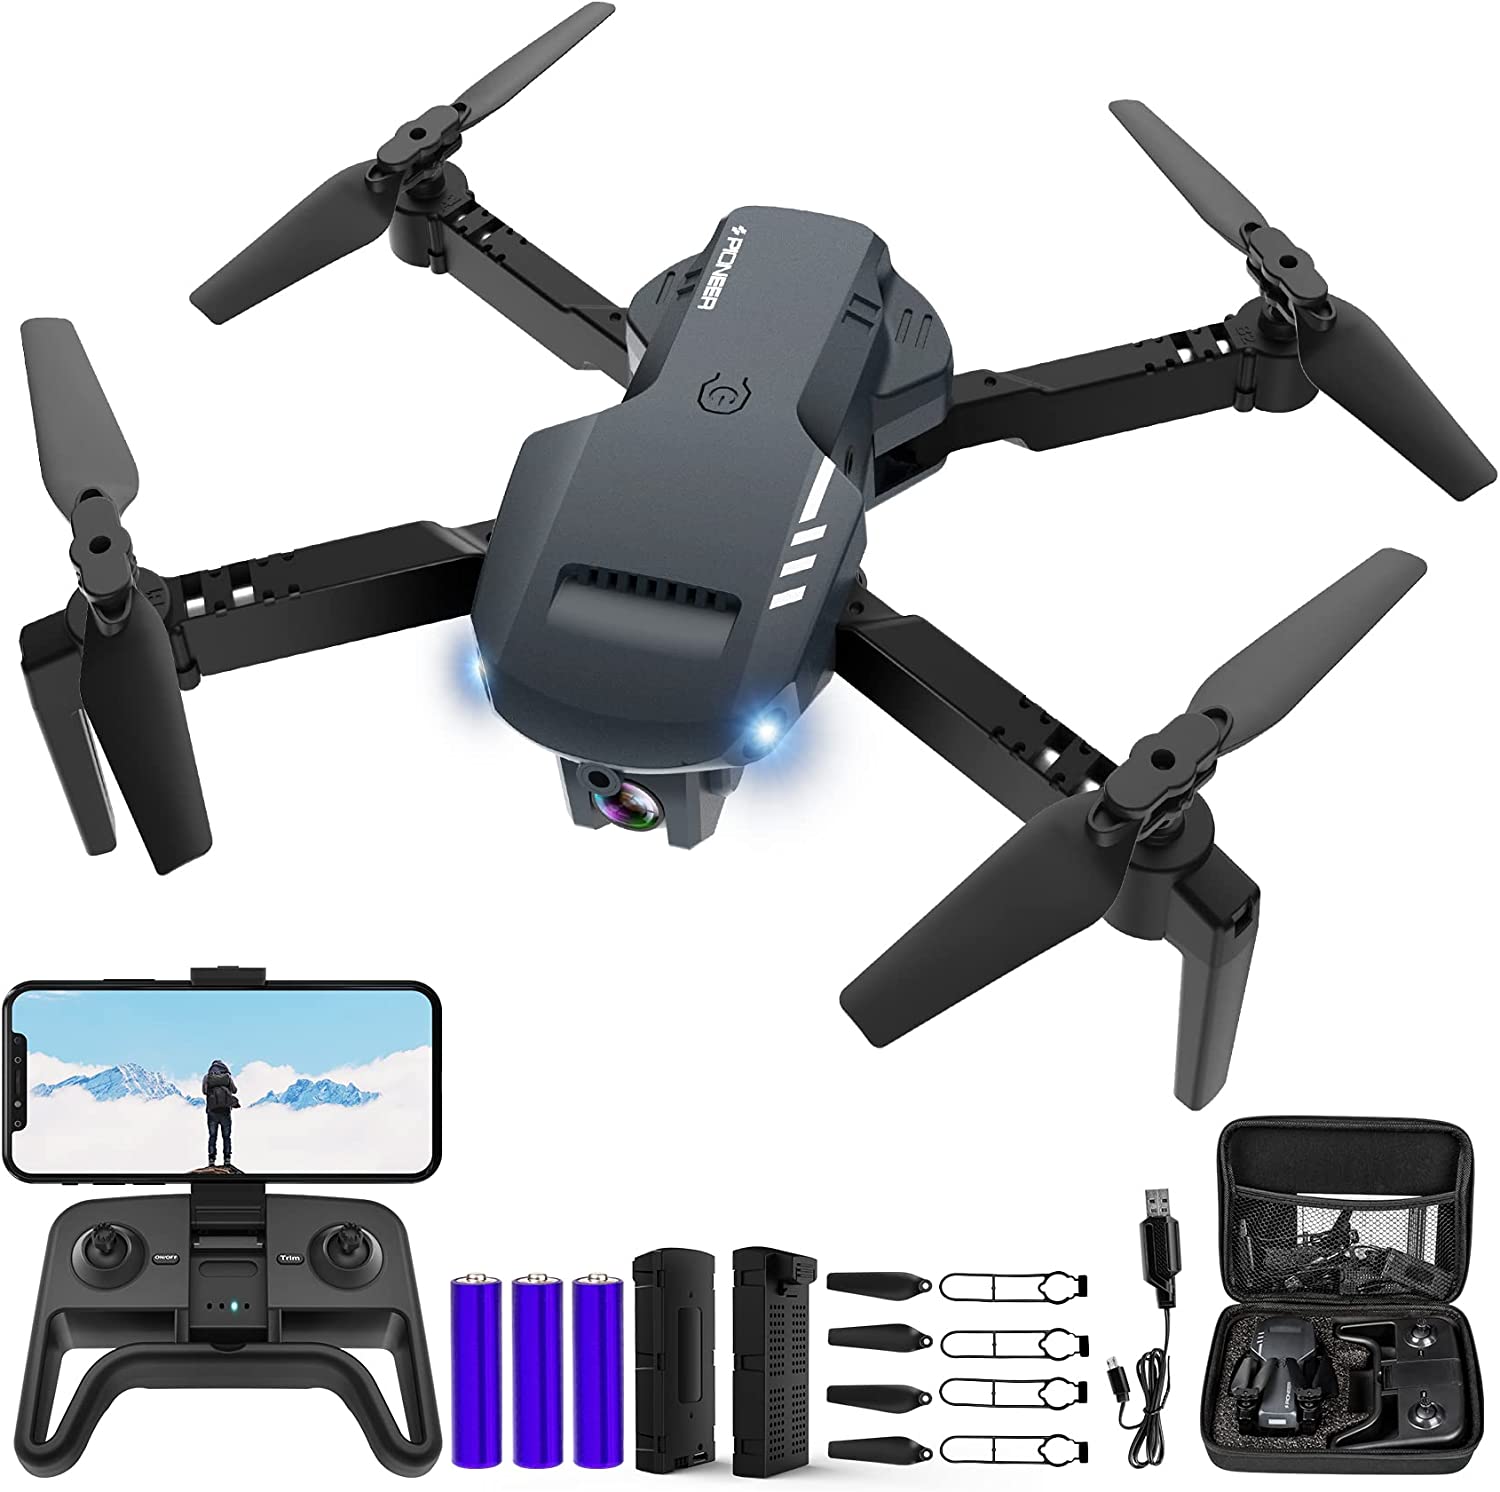 RADCLO Mini Drone with Camera - 1080P HD FPV Foldable Drone with Carrying Situation, 2 Batteries, 90° Adjustable Lens, One Key Take Off/Land, Altitude Hold, 360° Flip, Toys Gifts for Kids, Adults, beginners, Remote Controlled, Black